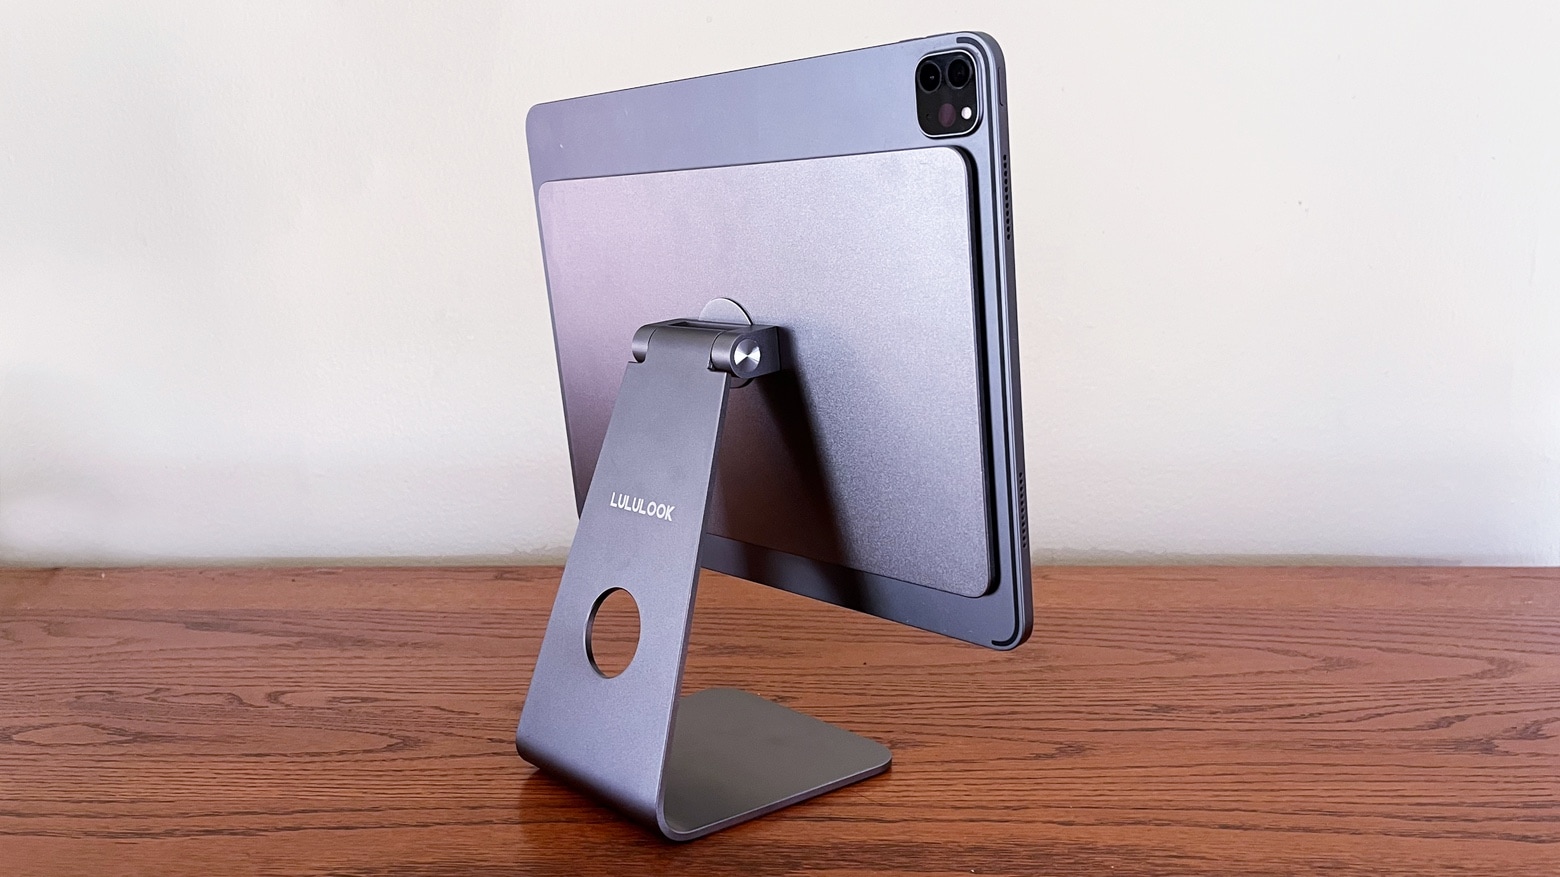 Lululook Urban Magnetic iPad Stand review: Turns tablet into iMac